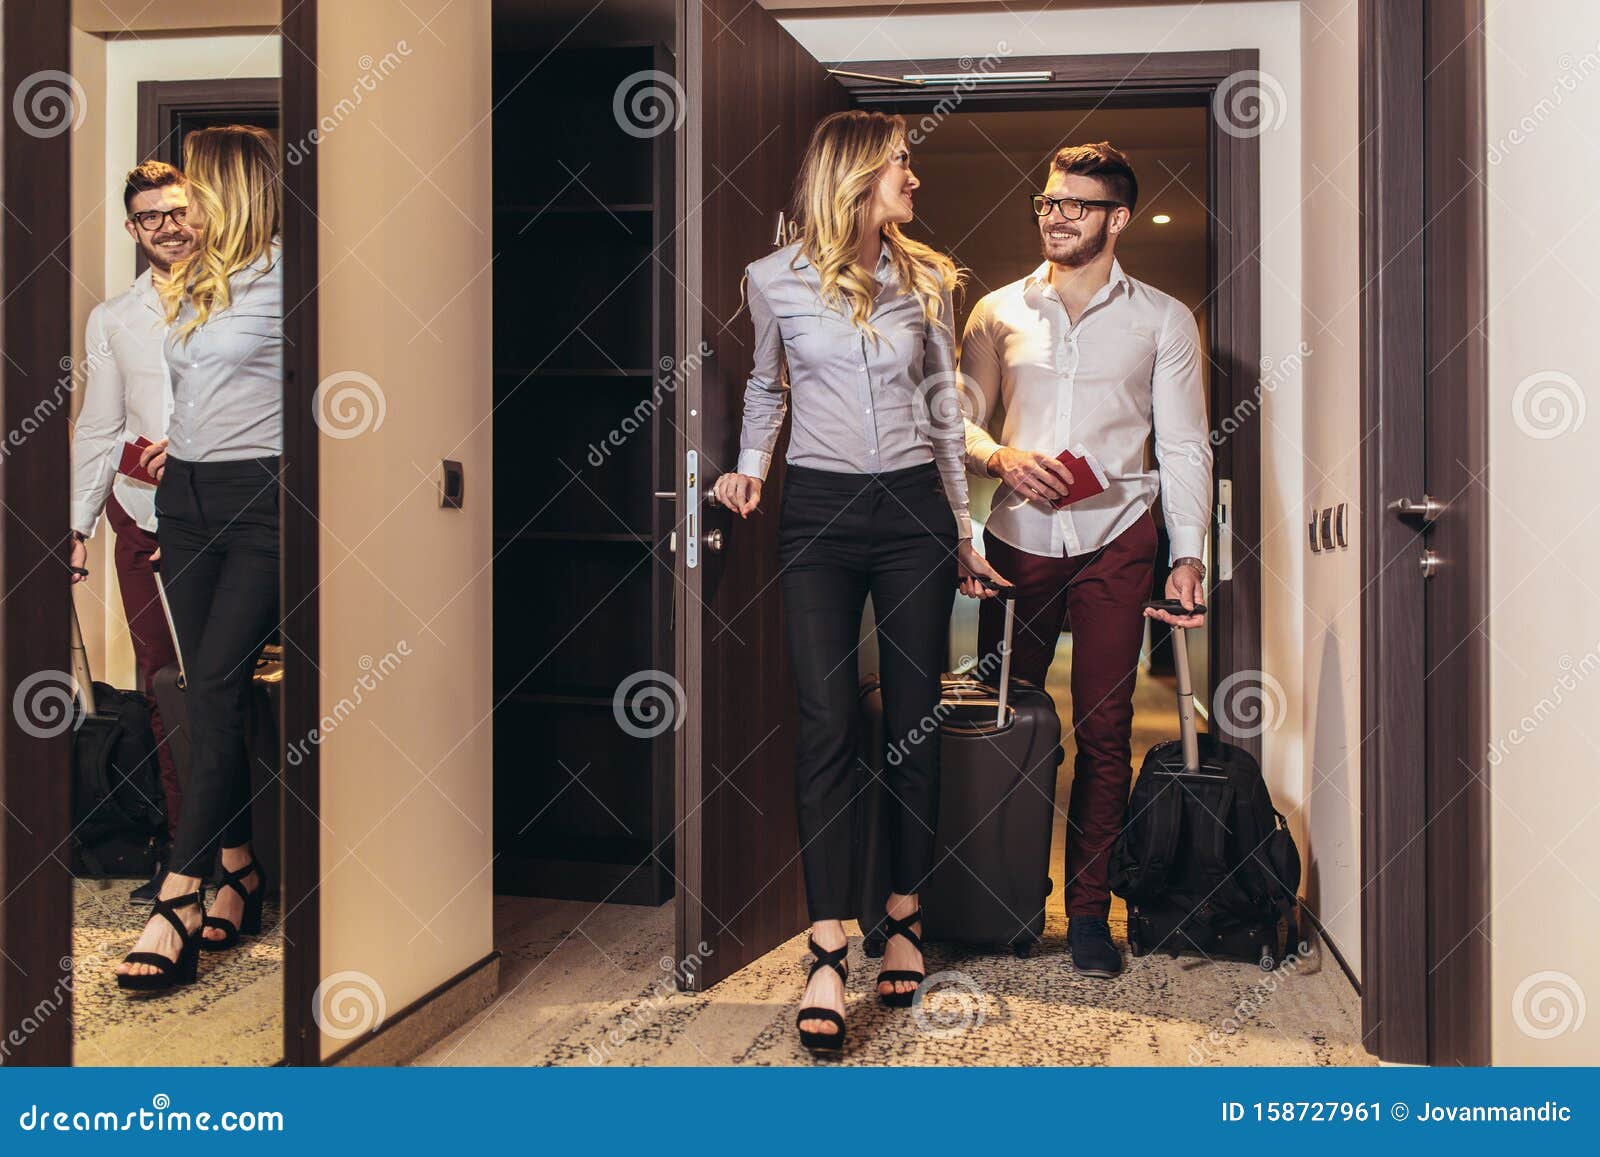 Vacation For Couple Stock Image Image Of Counter Luggage 158727